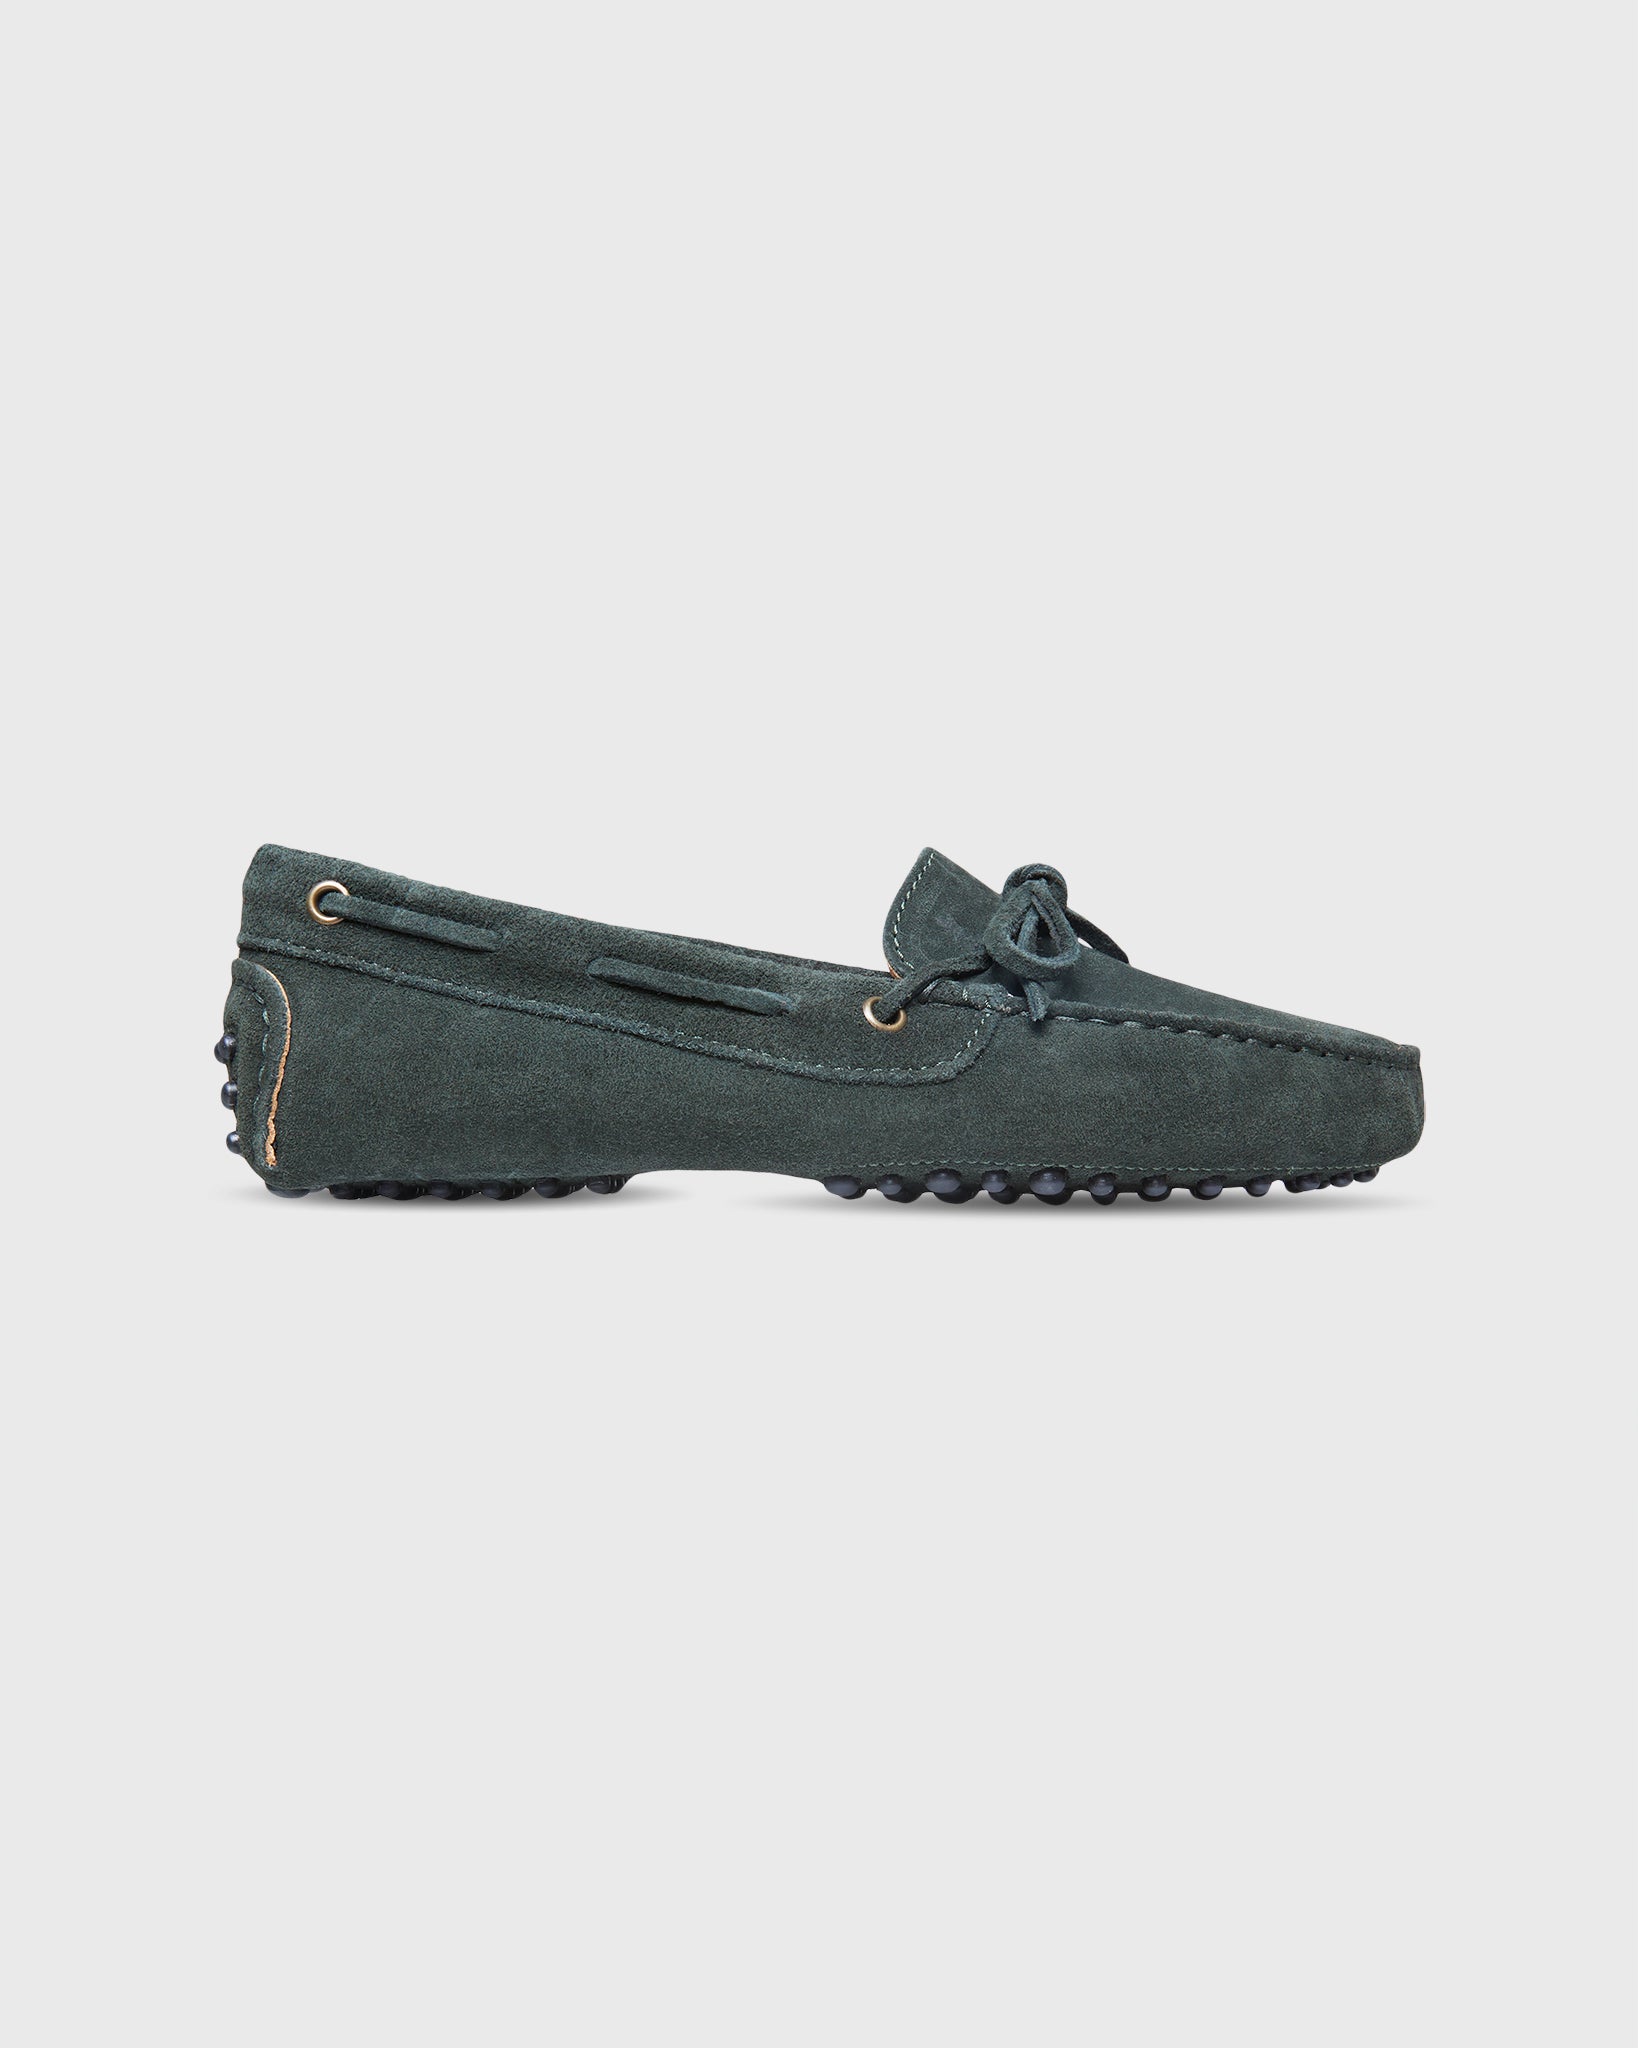 Driving Moccasin in Jungle Green Suede